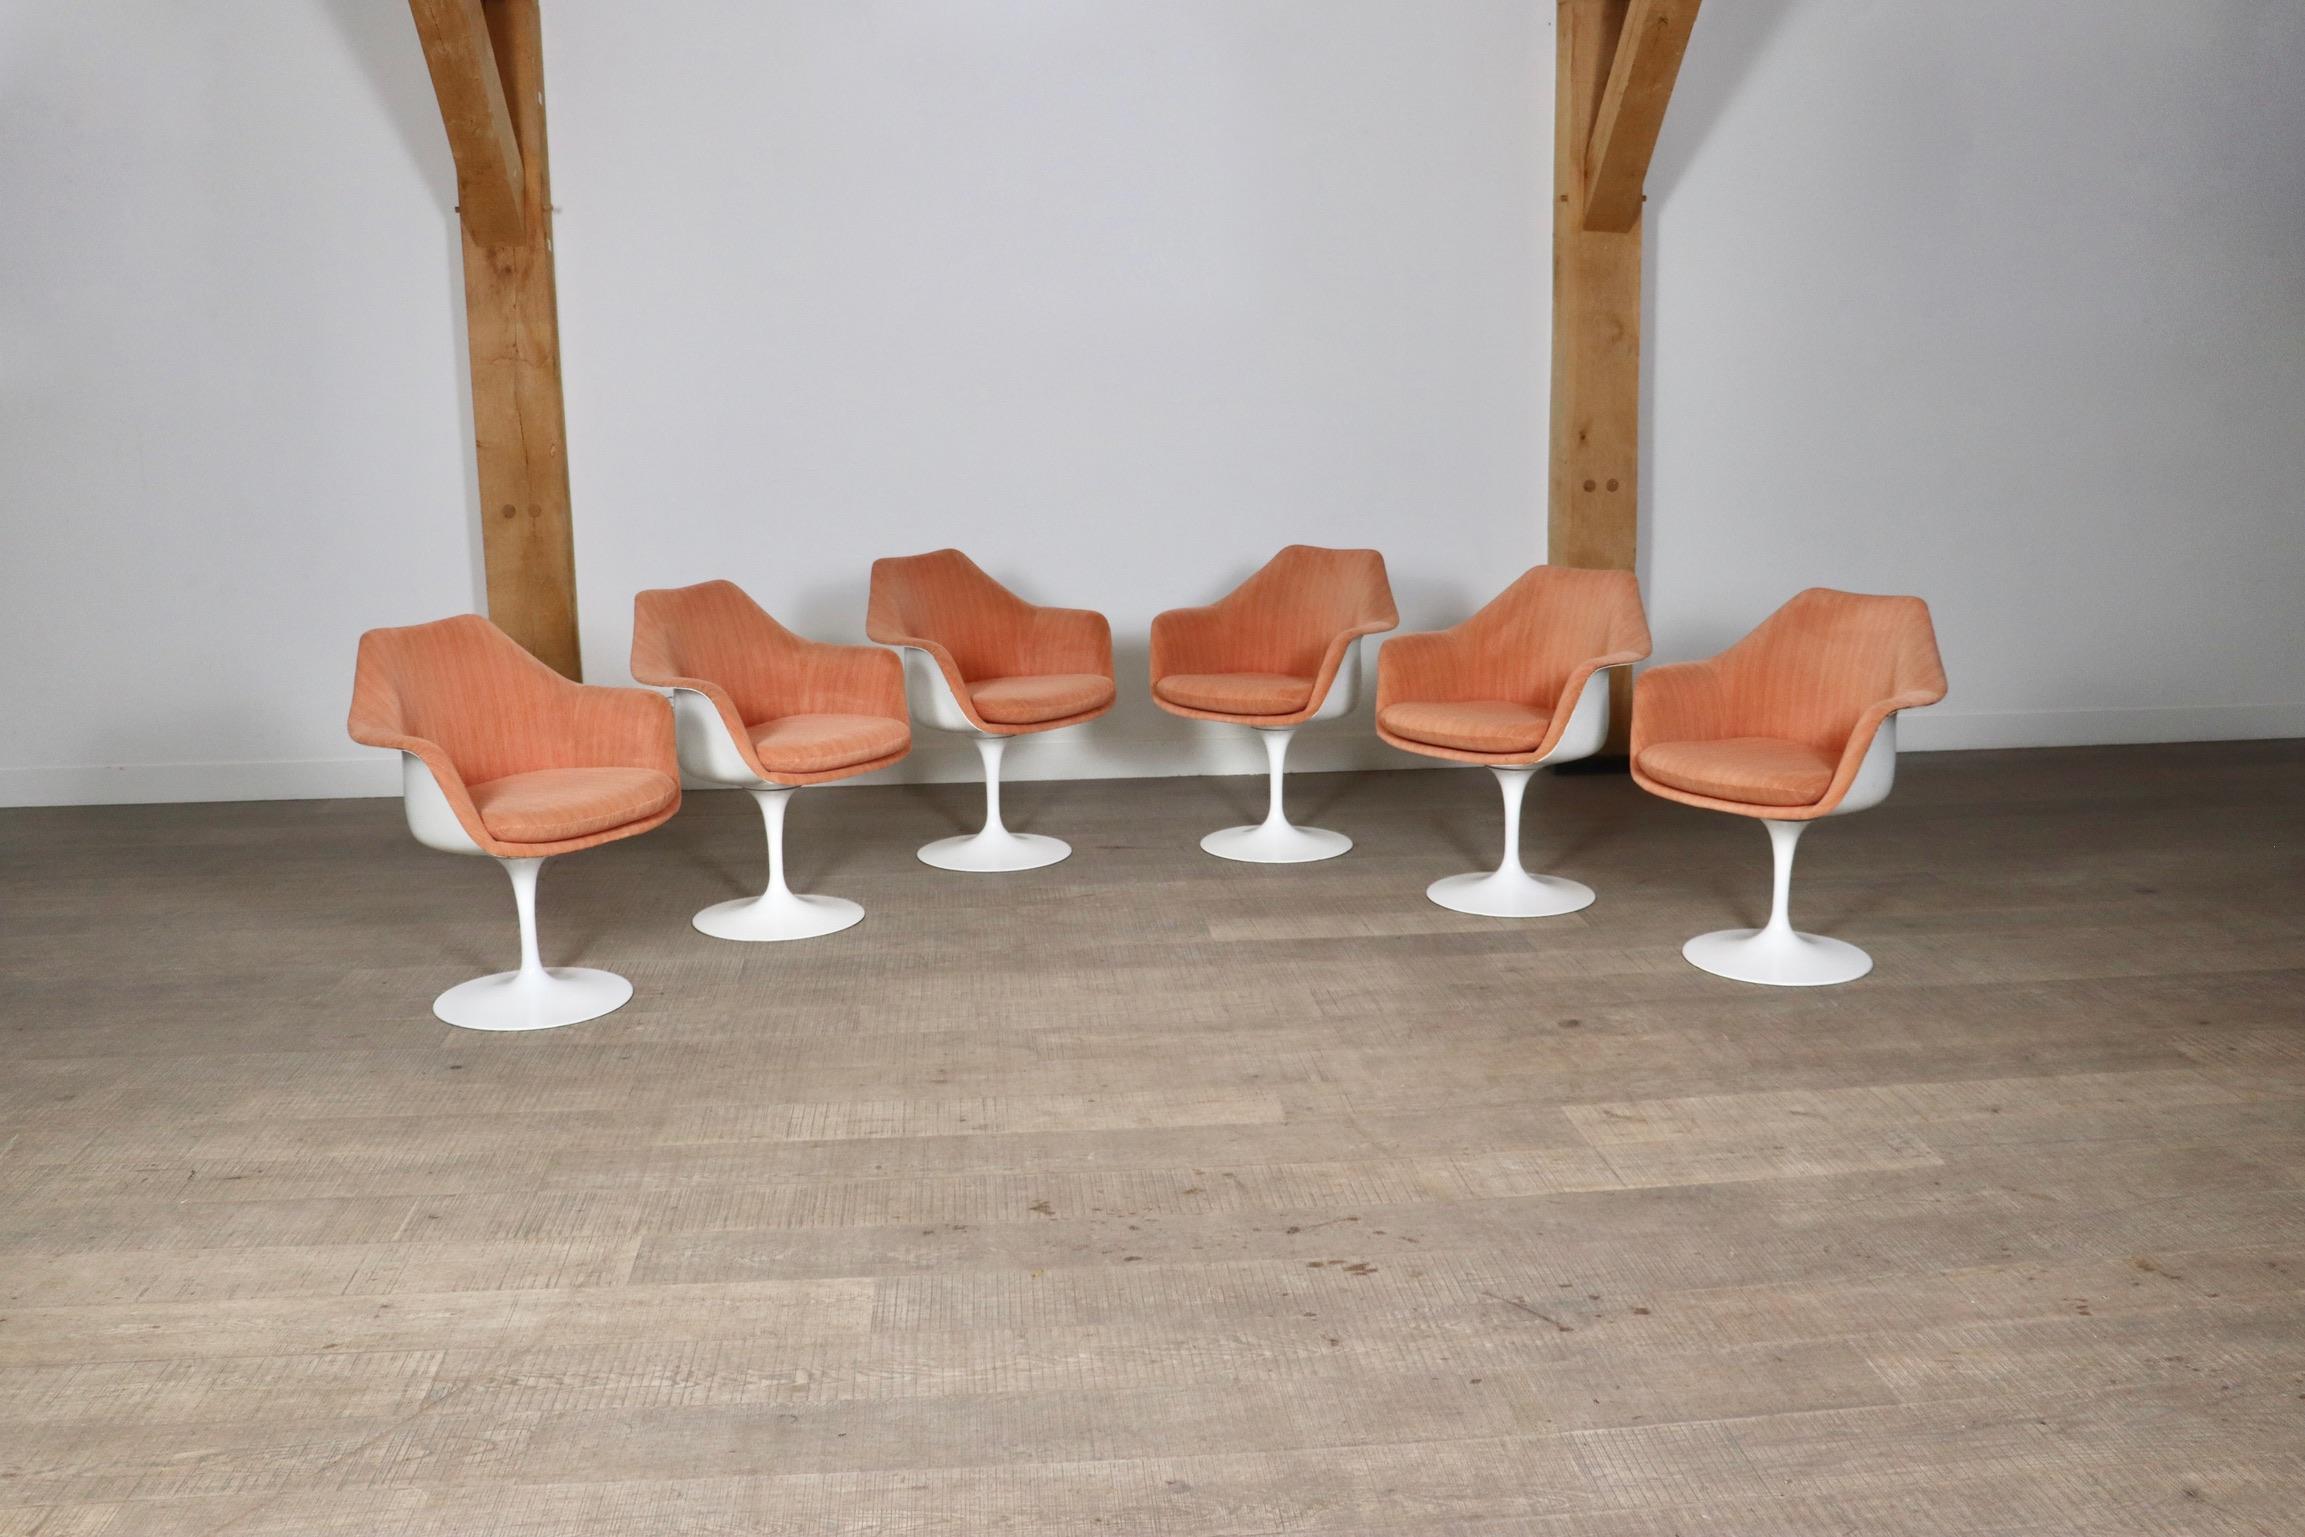 Amazing set of 6 Tulip chairs in original coral upholstery by great designer Eero Saarinen, created in 1956. This particular set all have a swivel base, and are all individually marked.

The design has obtained awards such as Museum of Modern Art